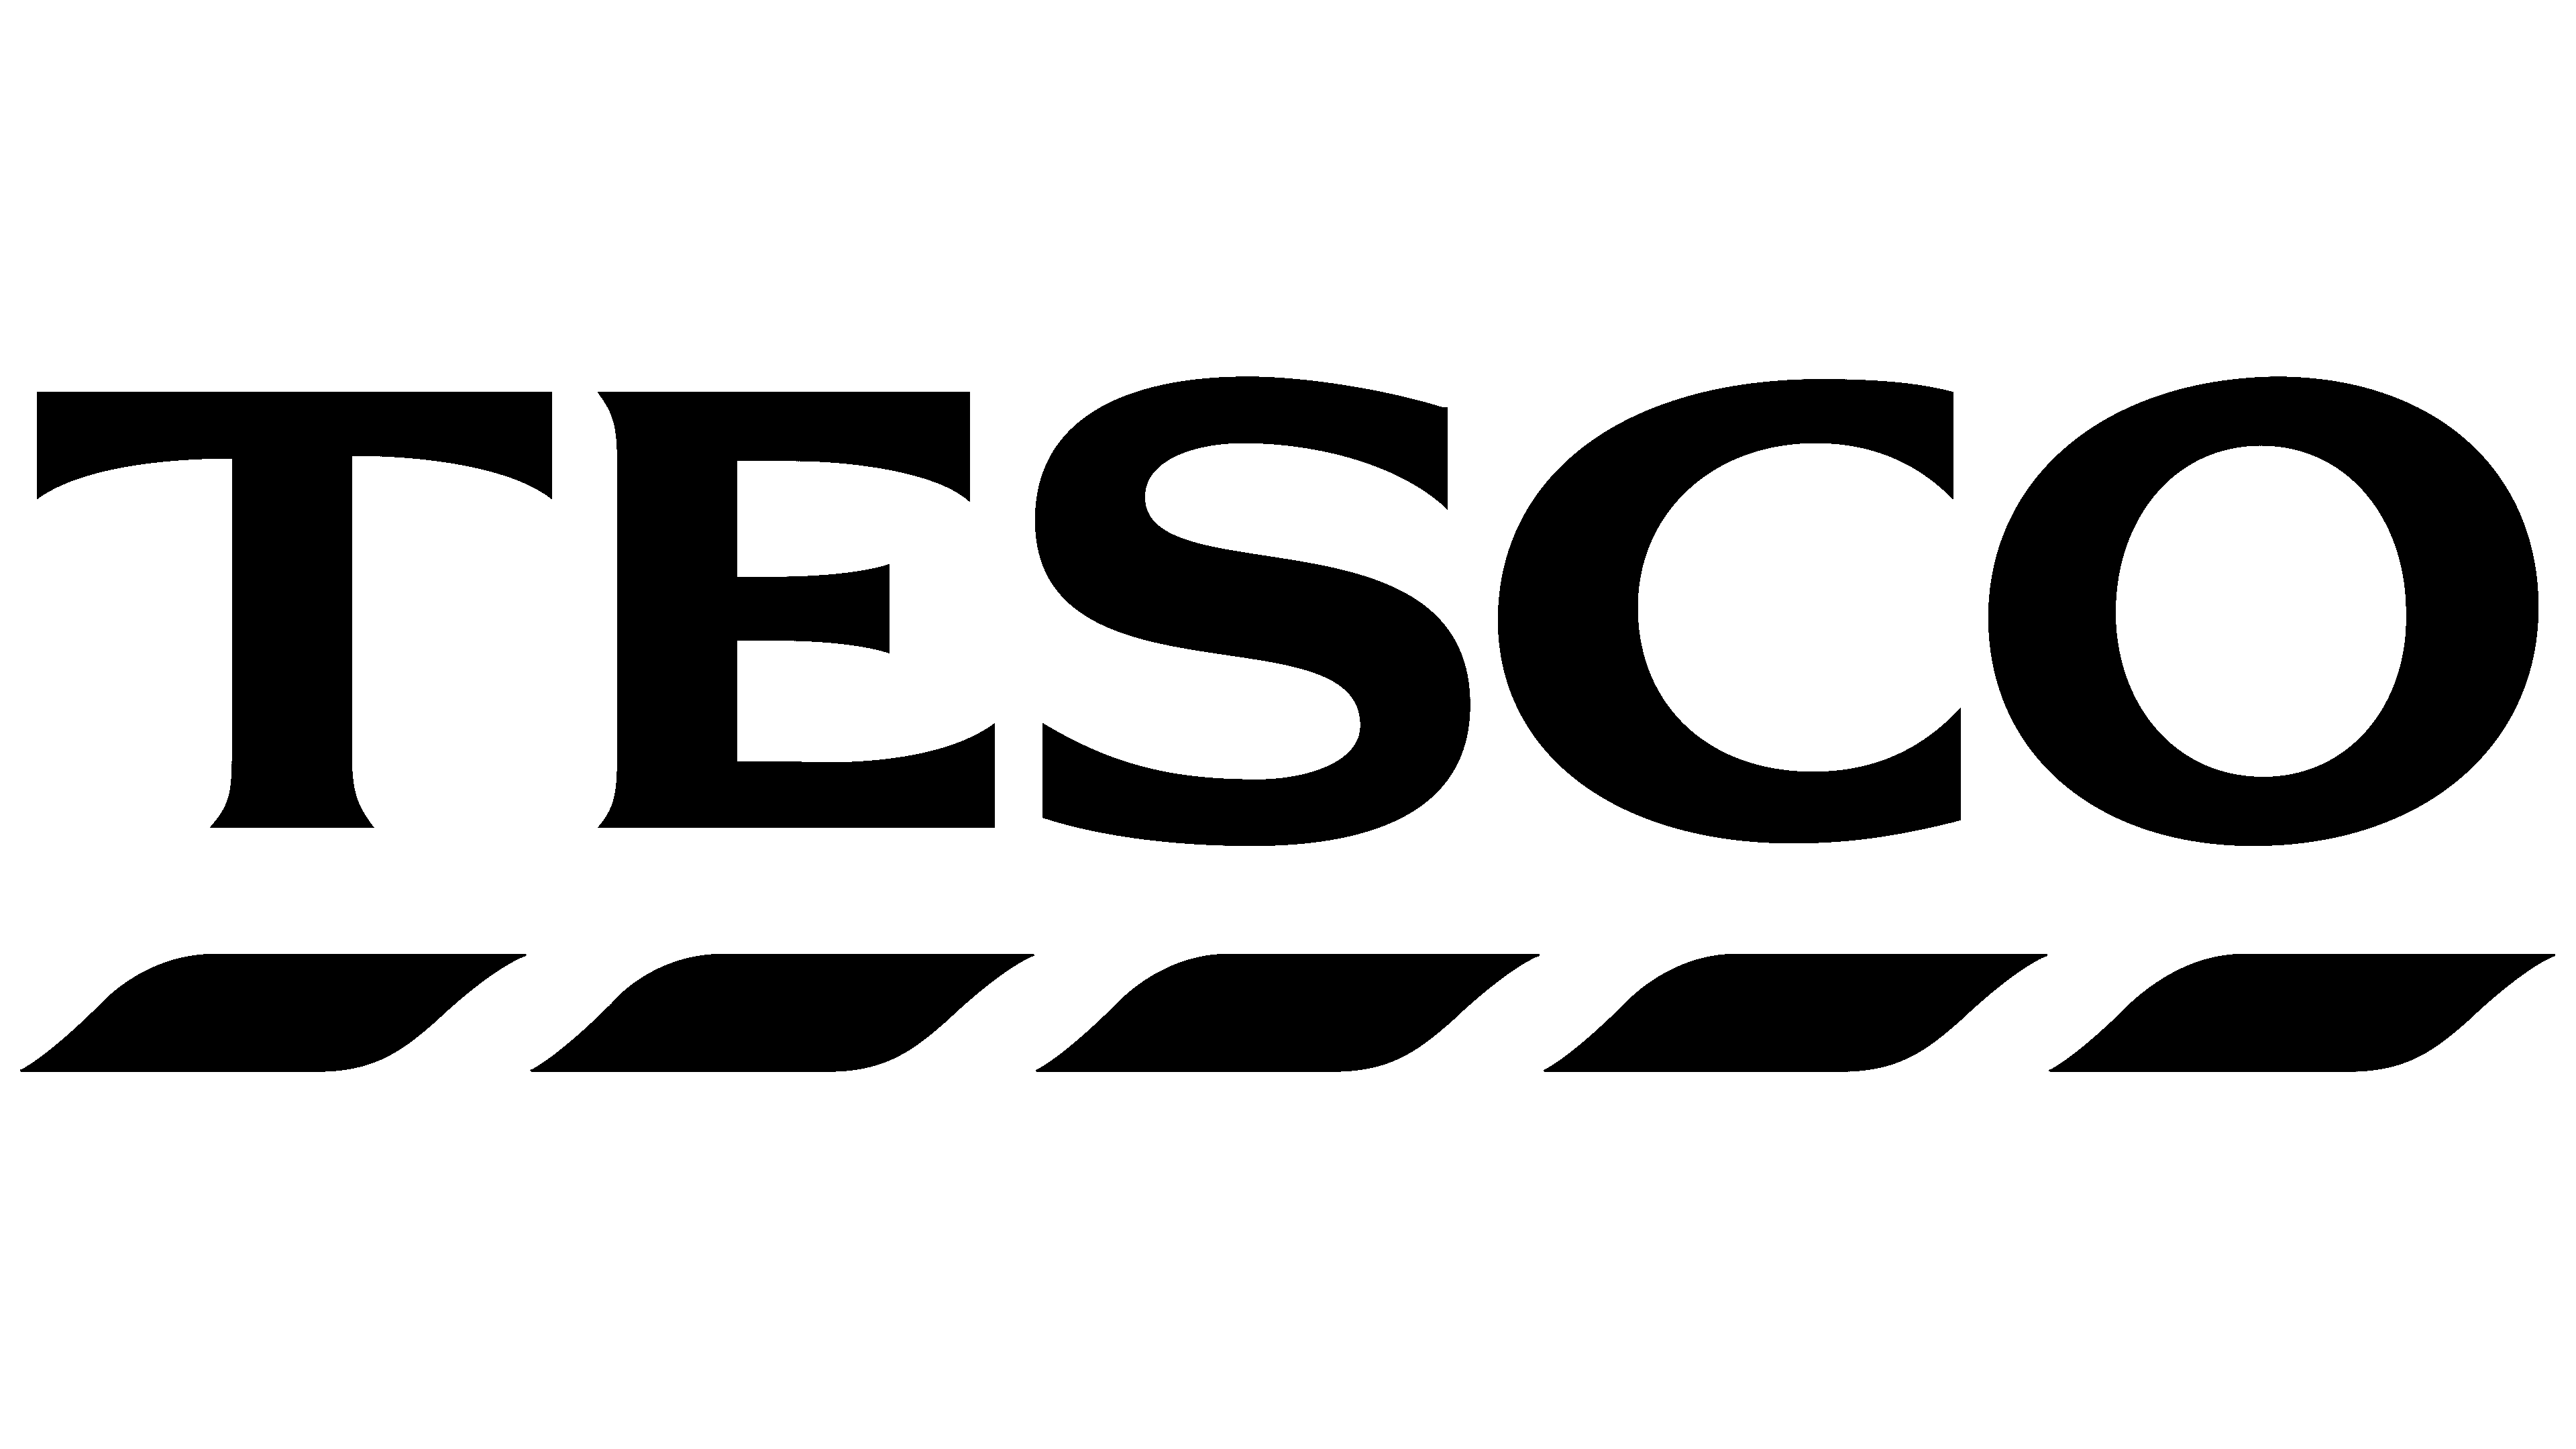 Tesco Logo, symbol, meaning, history, PNG, brand